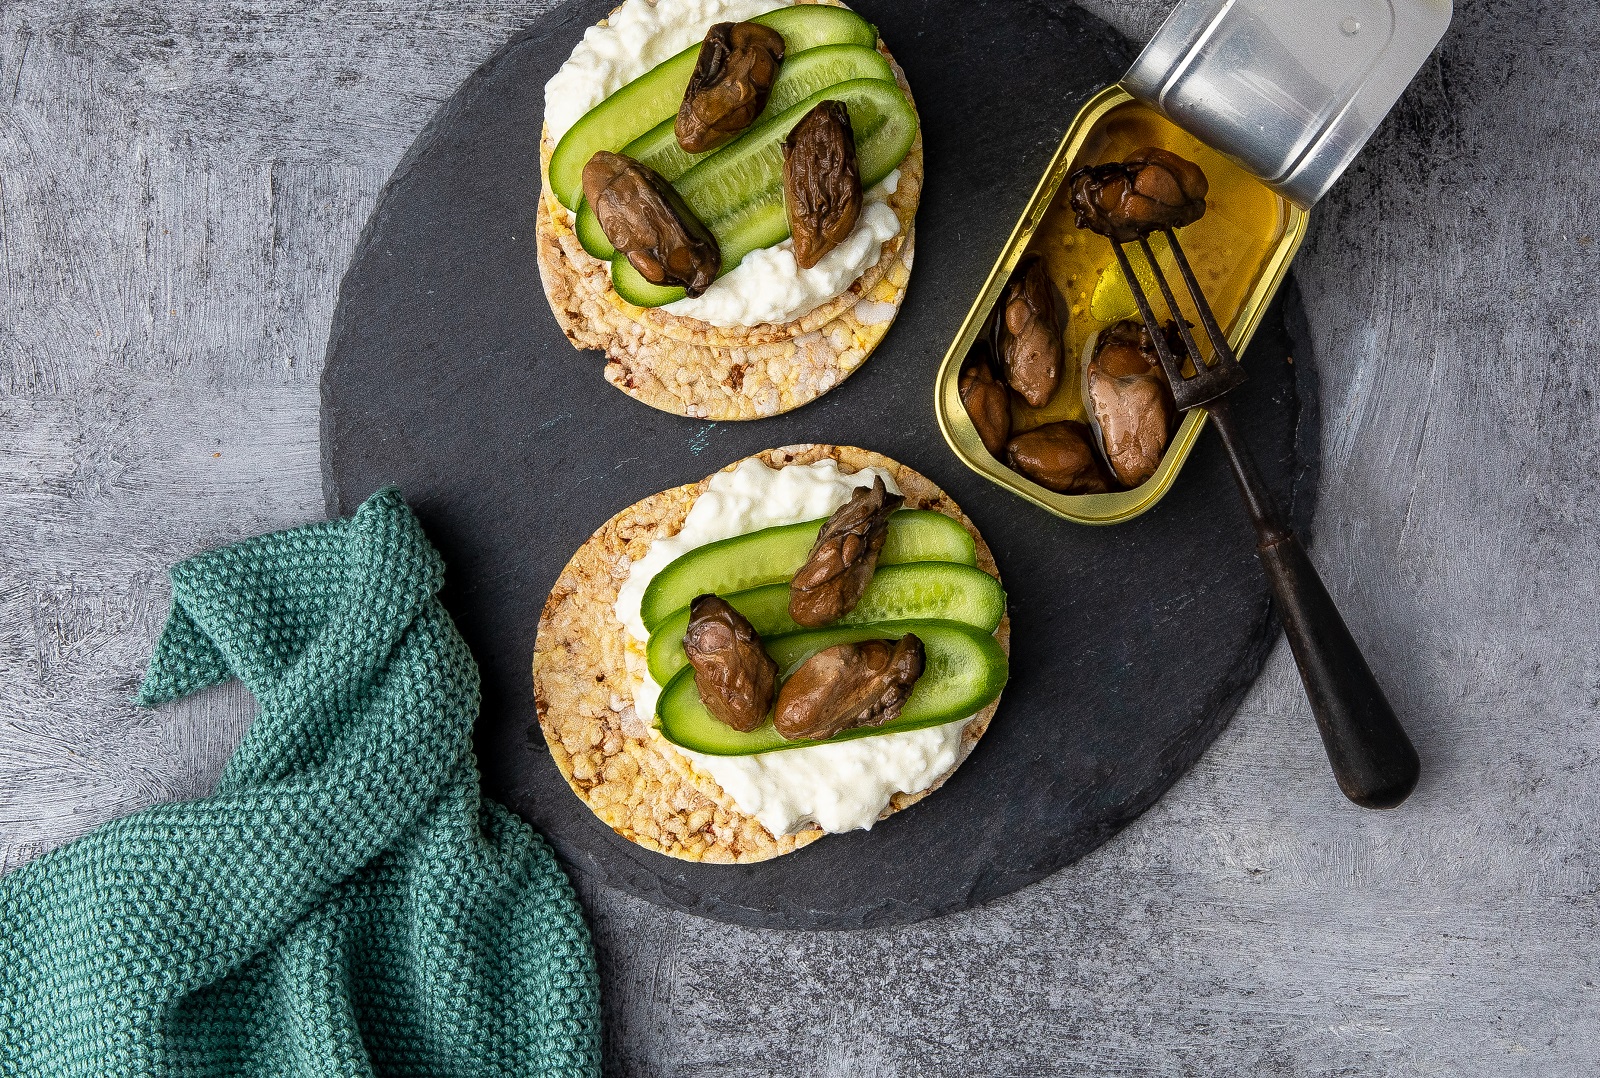 Cream Cheese, Cucumber & Smoked Oysters on CORN THINS slices